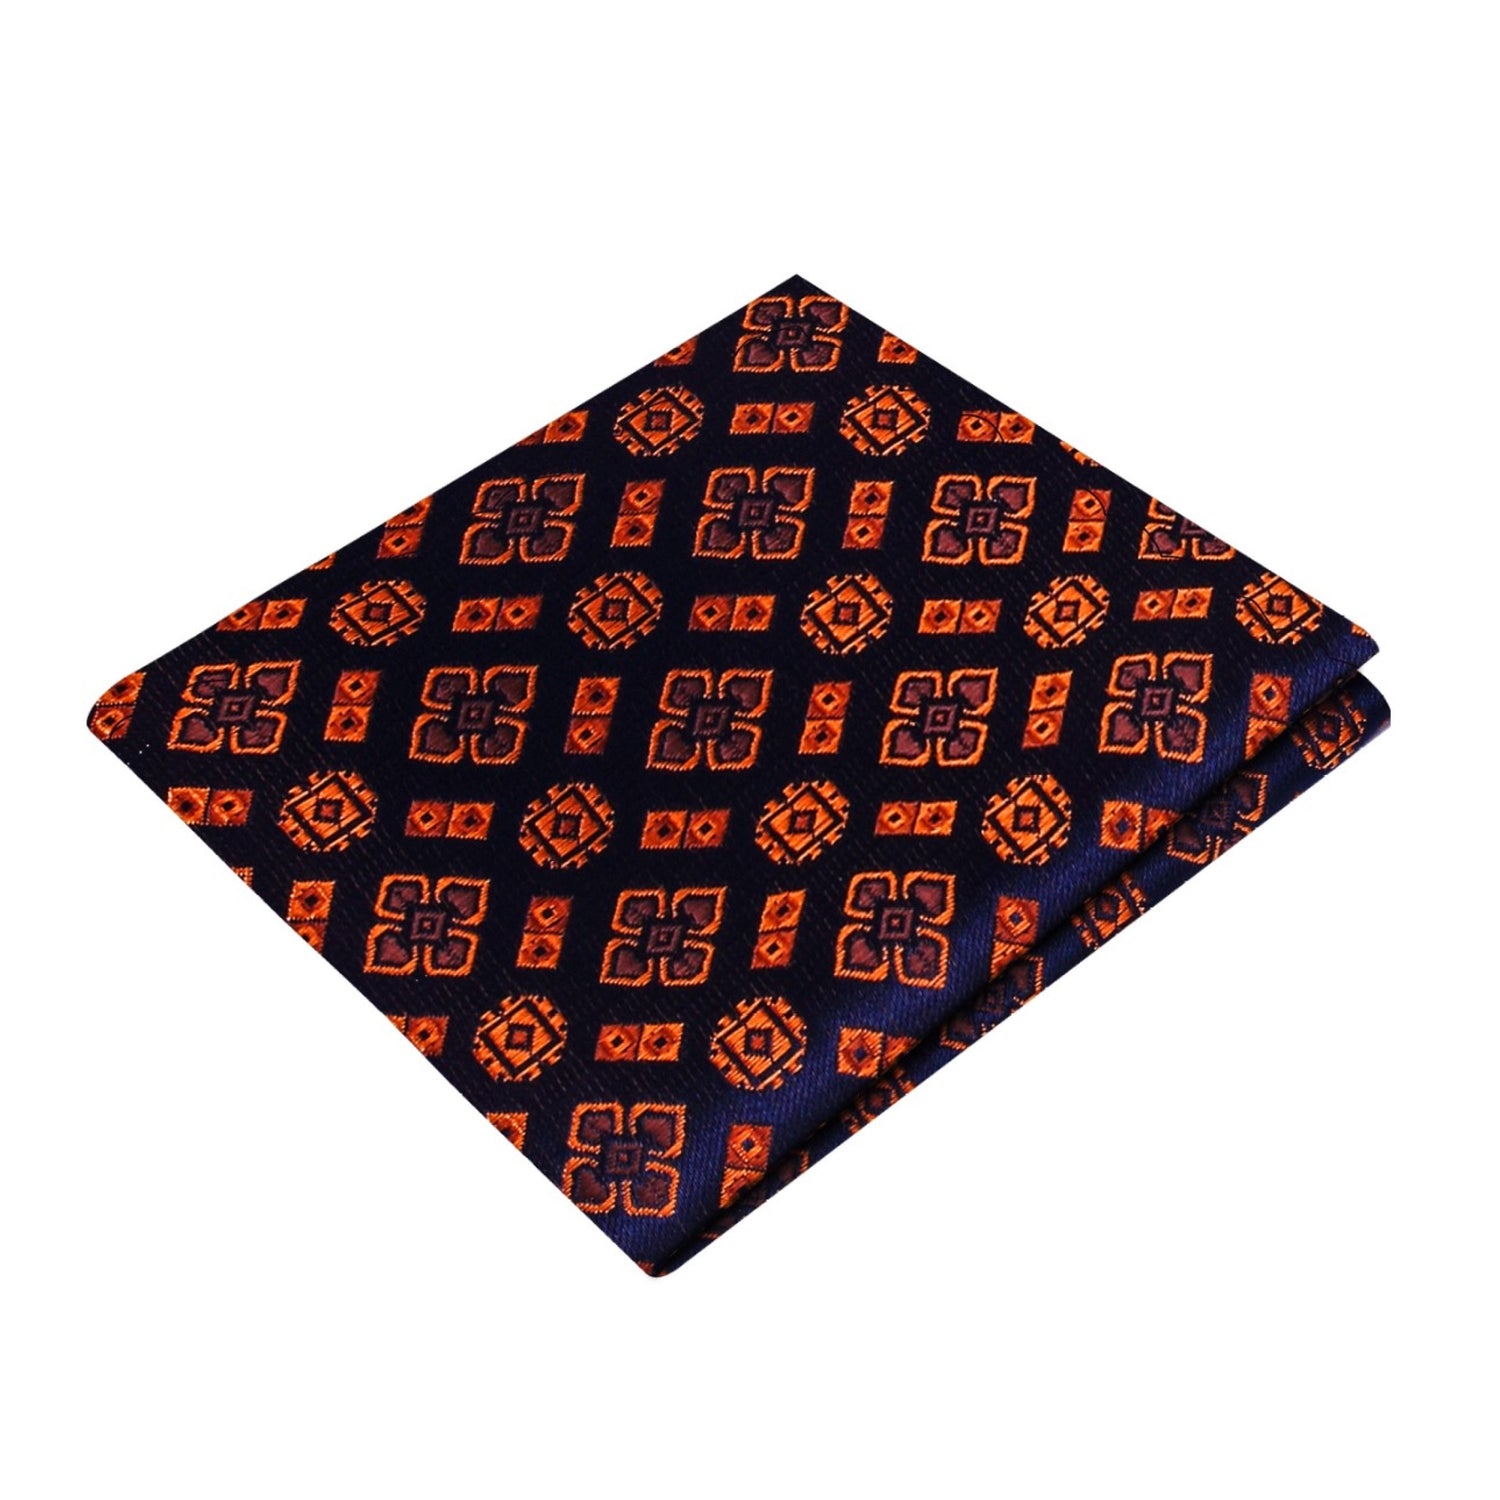 A Dark Blue, Copper Abstract Shapes Pattern Silk Pocket Square